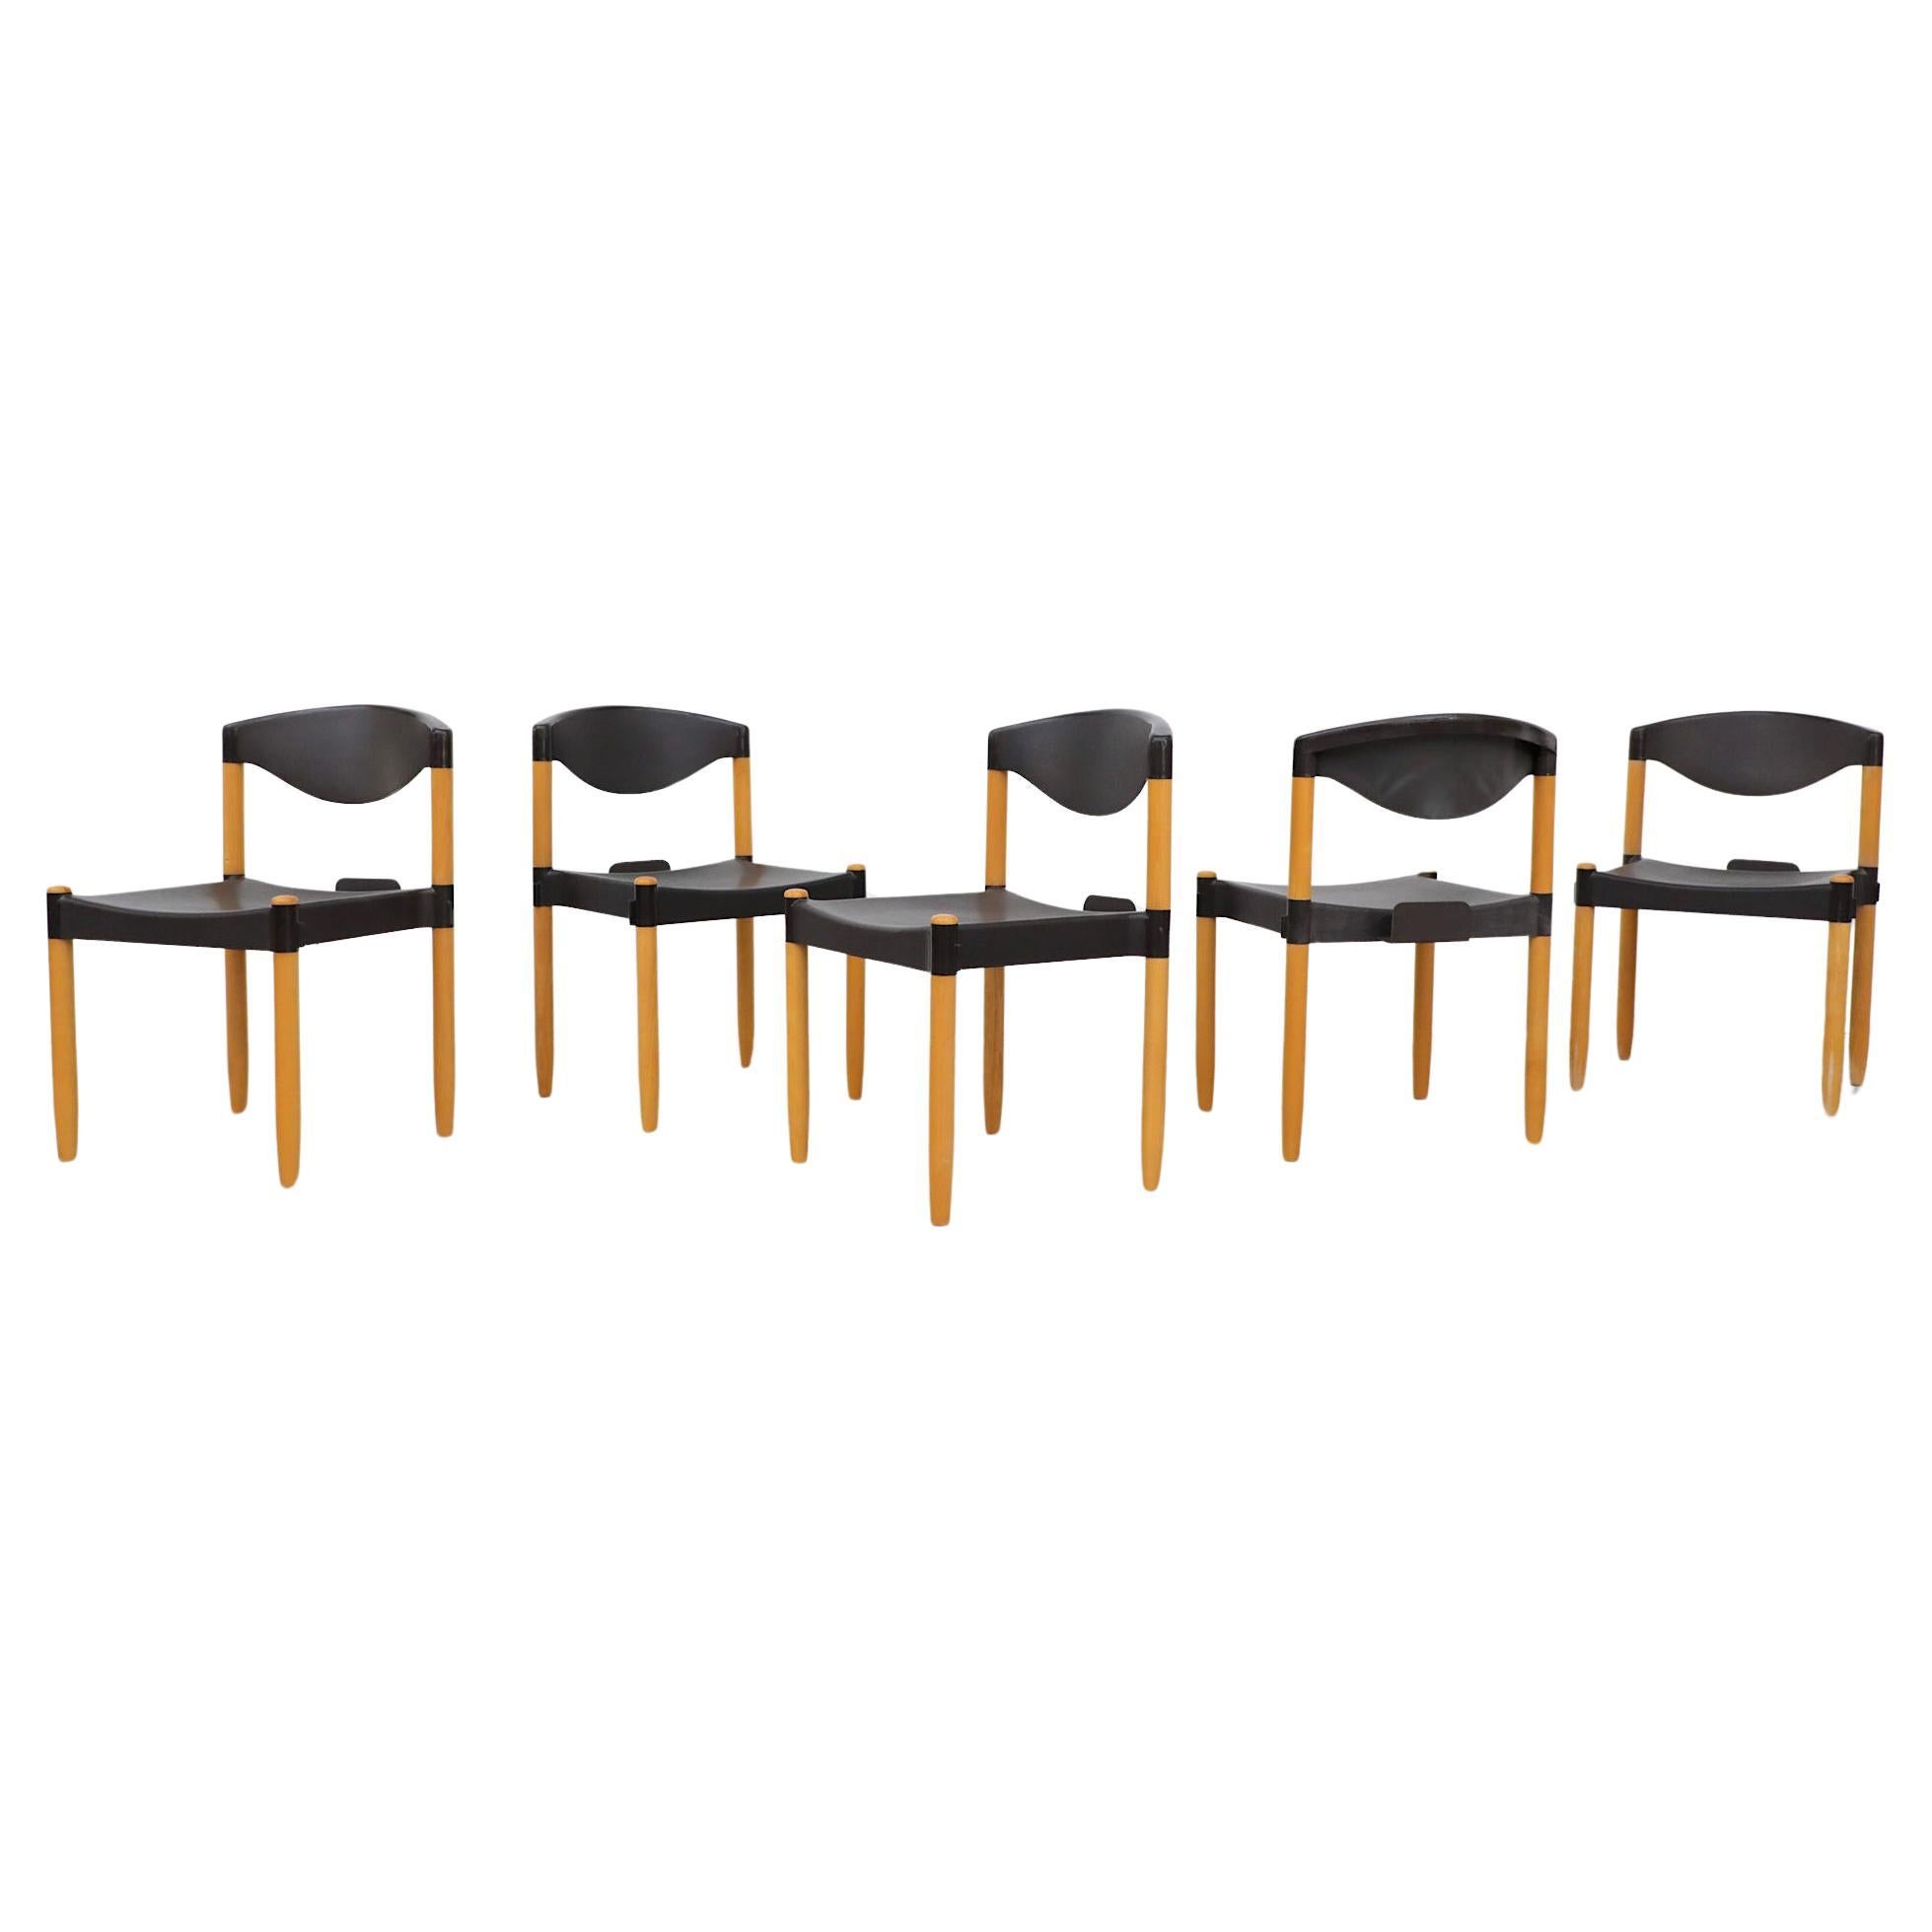 Mid-Century Black & Birch 'Strax' Stacking Chairs by Hartmut Lohmeyer for Casala